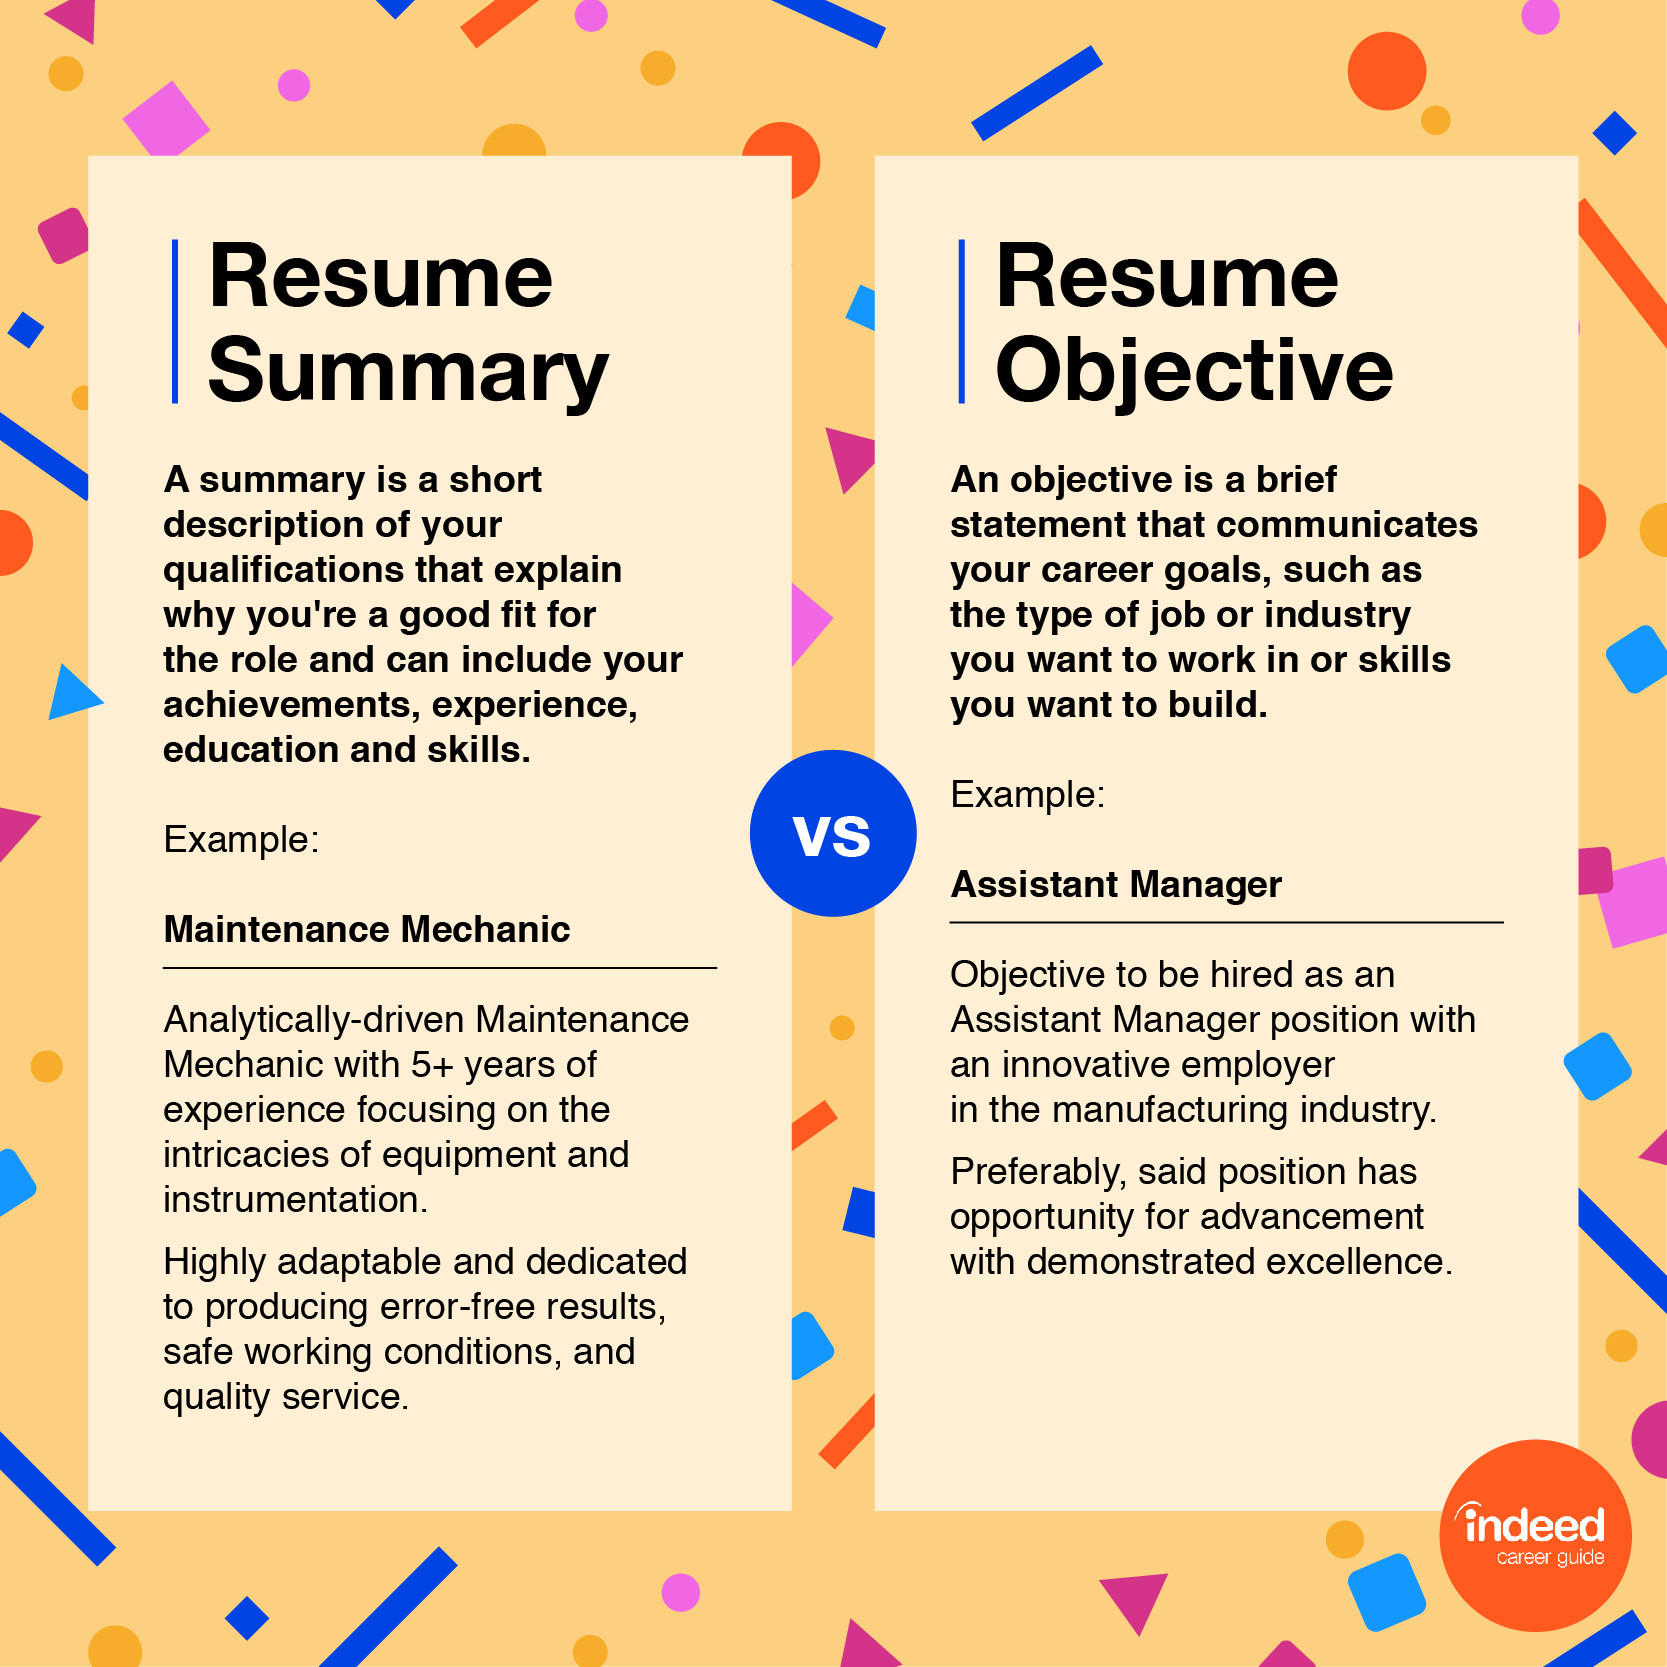 5 Impressive Resume Objective Samples to Craft Your Own 70lancarrezekiq Resume Objective Examples (with Tips and How-to Guide …